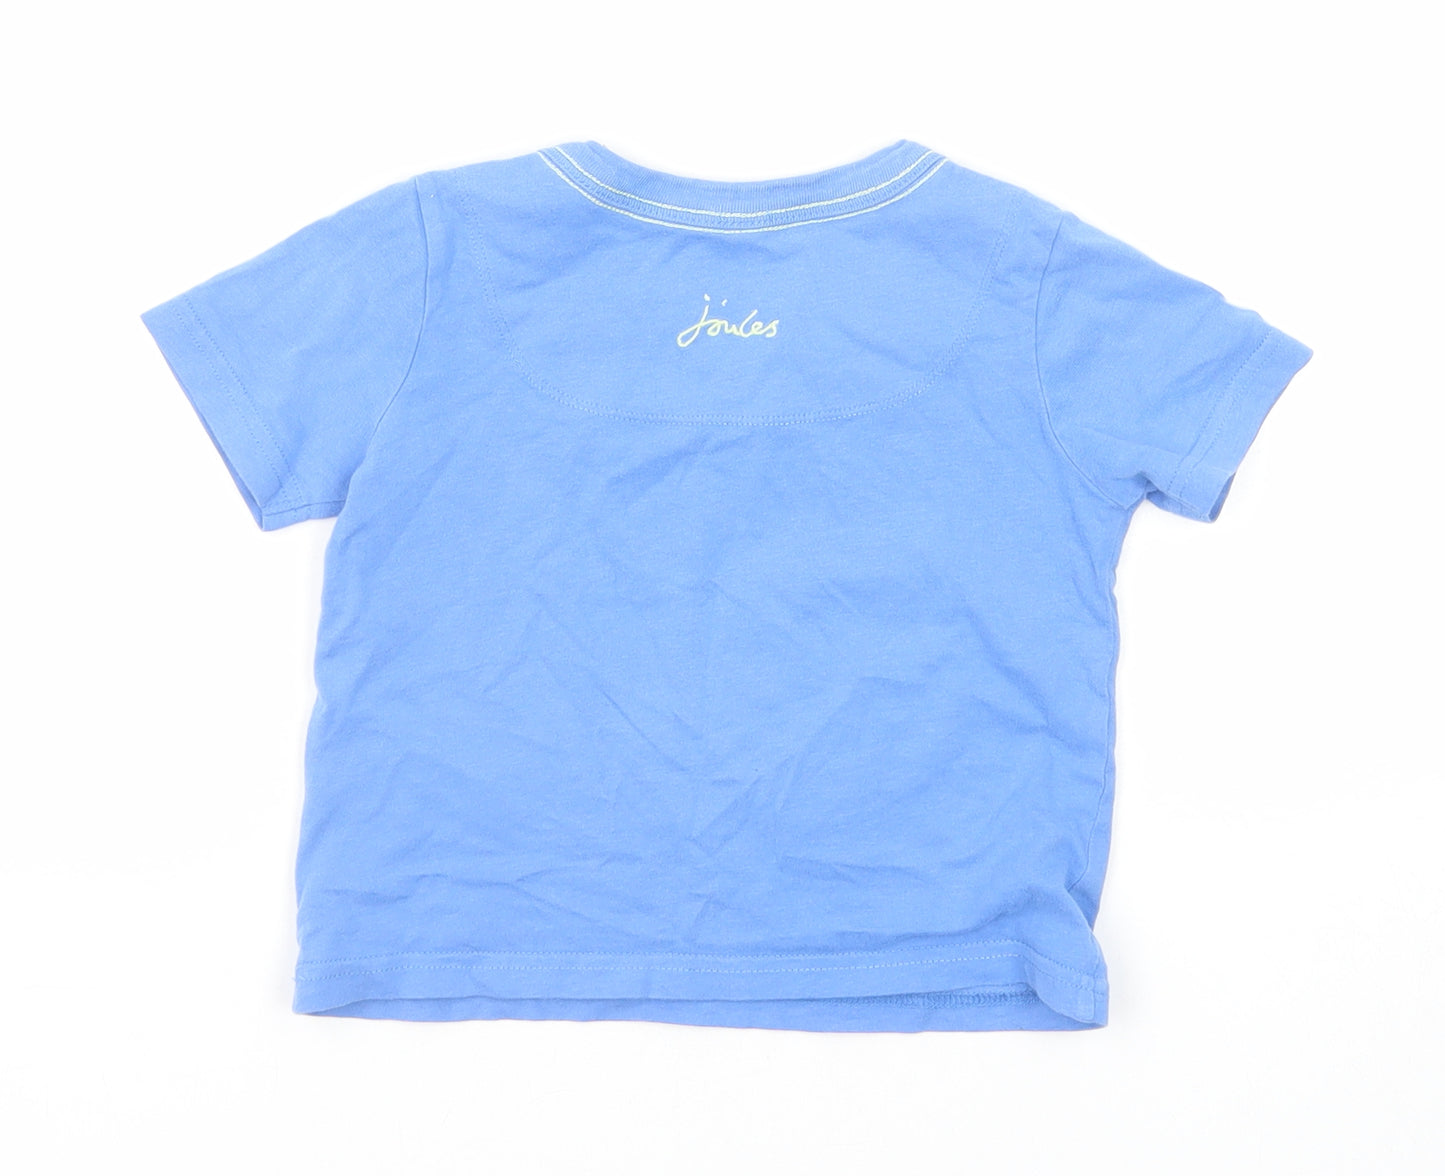 Joules Boys Blue Cotton Basic T-Shirt Size 2 Years Round Neck Pullover - Crabs